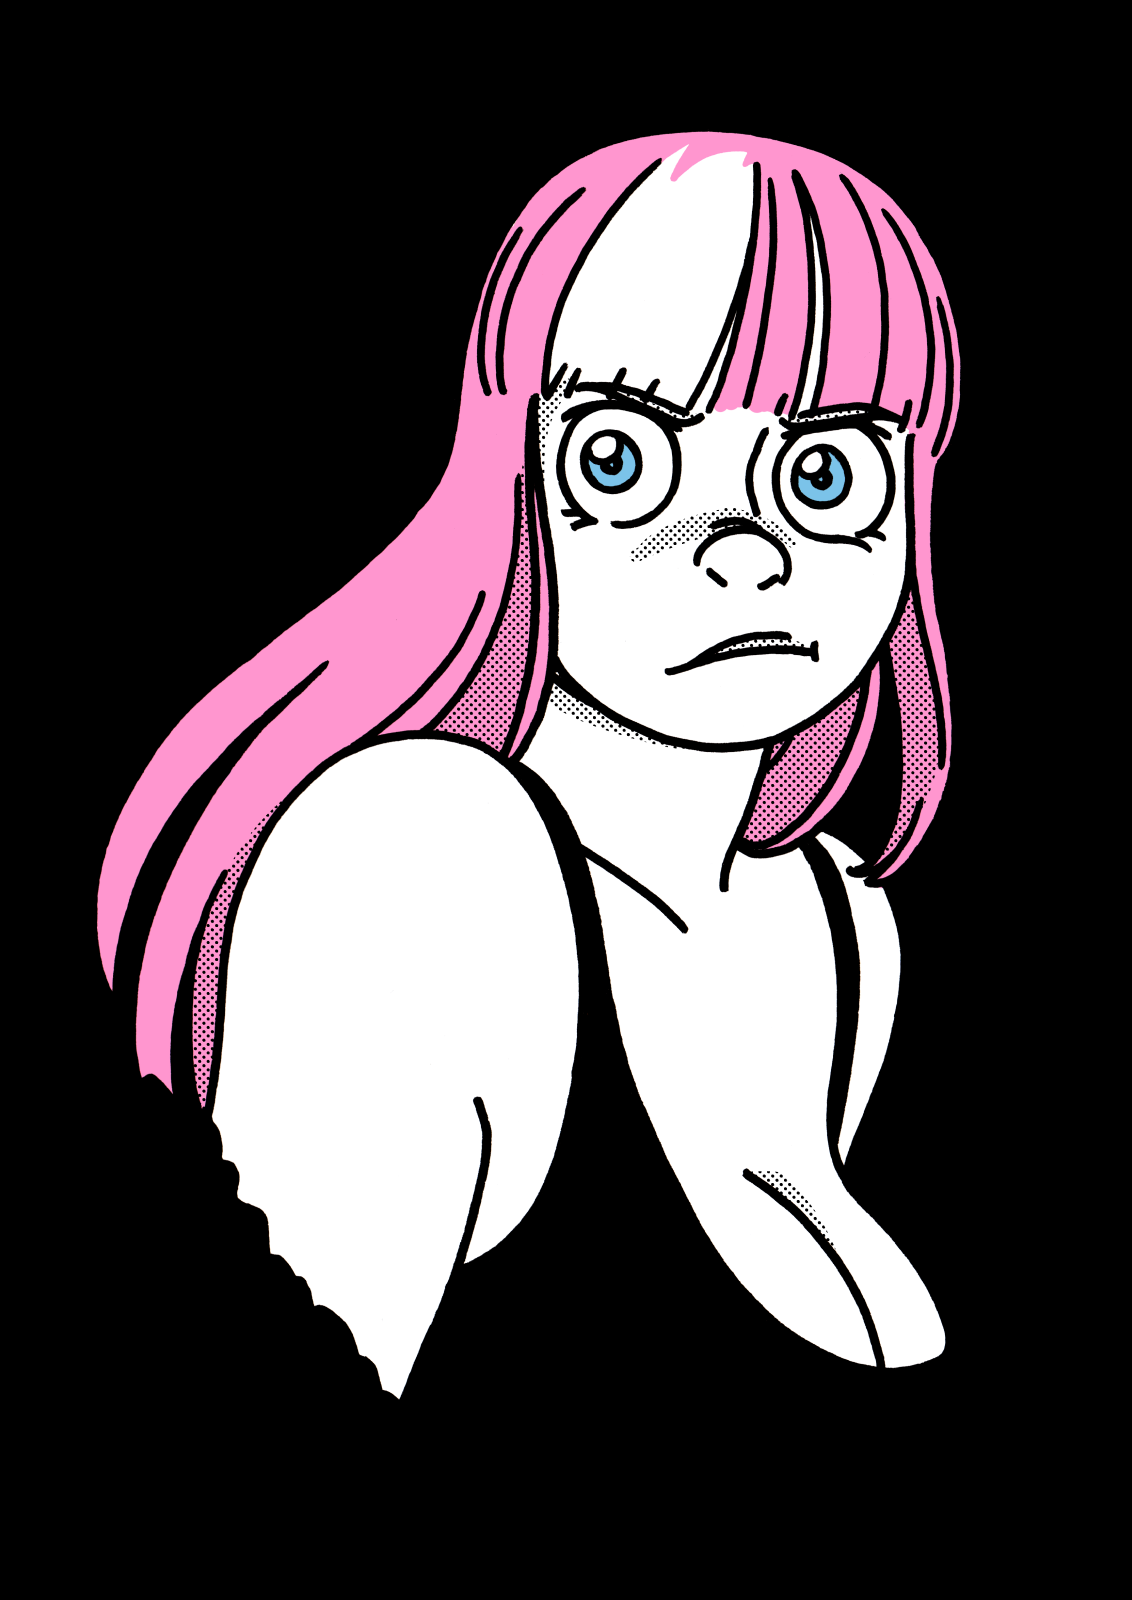 Penny, a girl with dyed pink hair with a white stripe. She seems like she’s had enough of whatever this is.